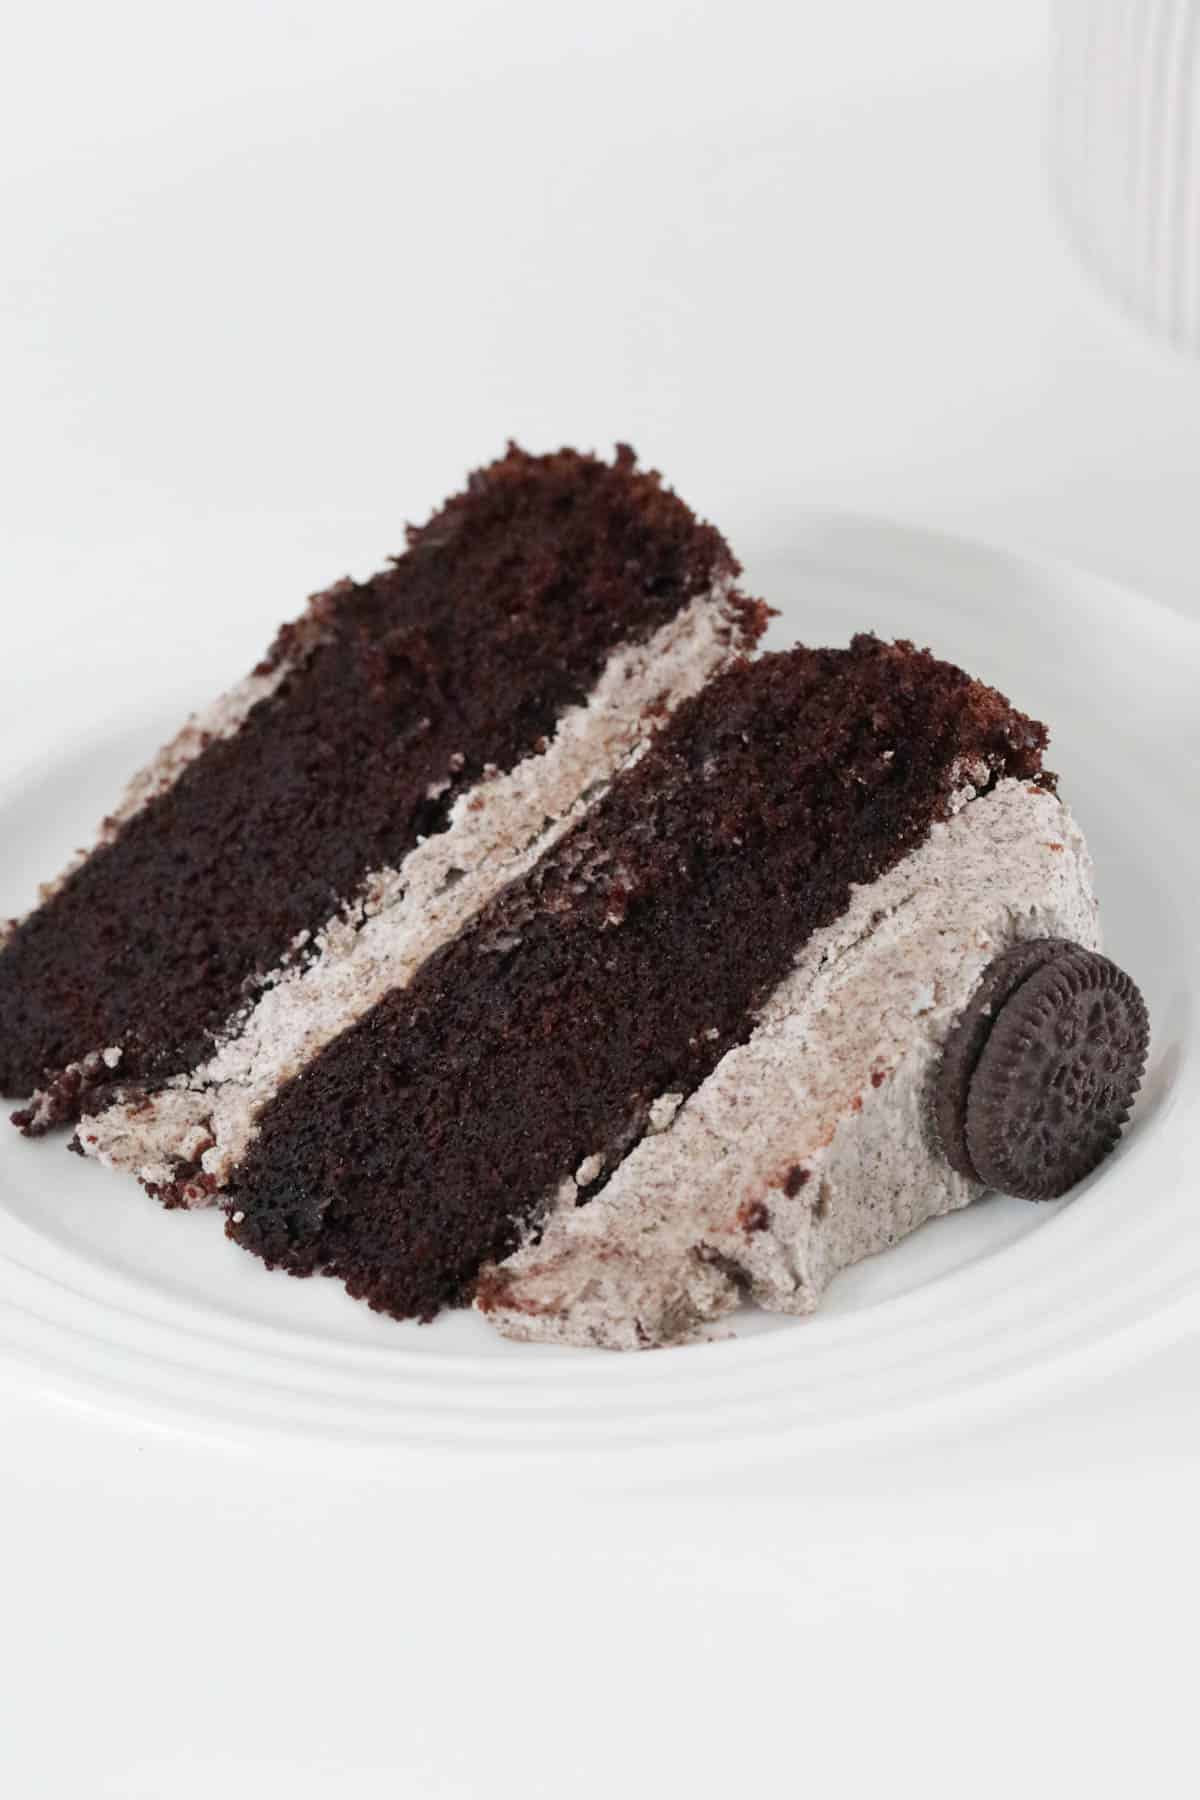 A slice of Oreo mud cake on a white plate.